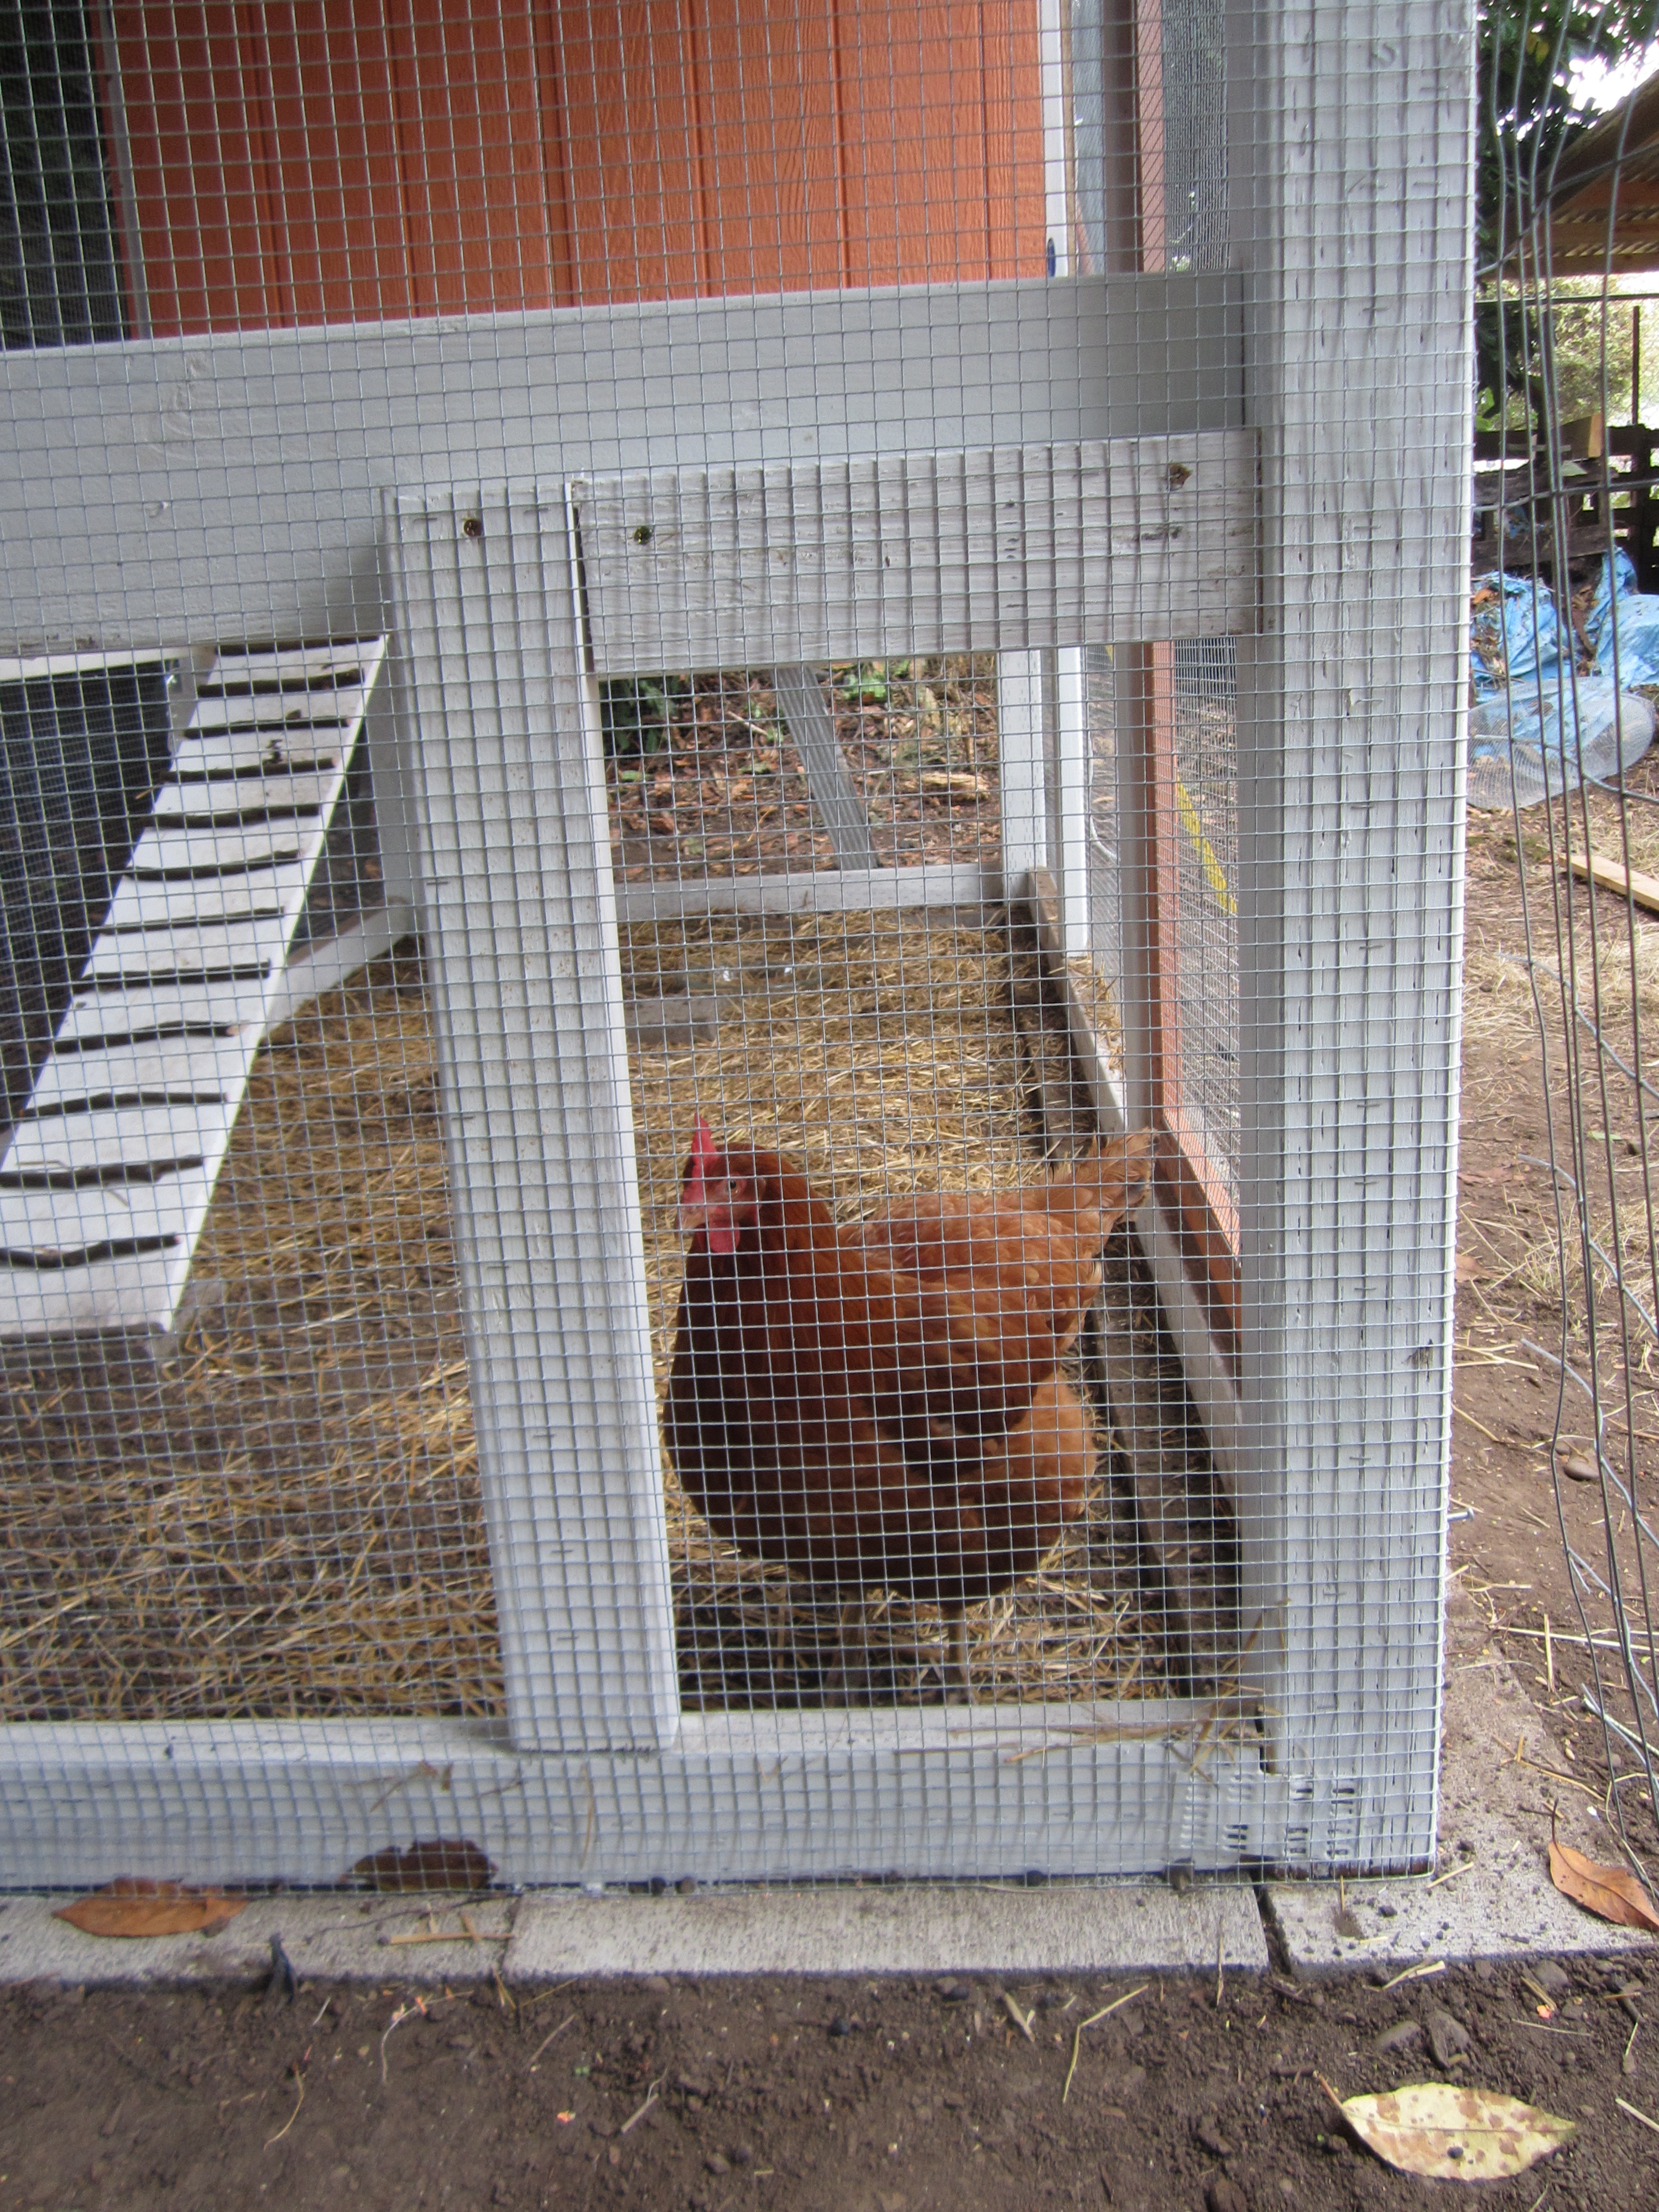 Framing the run access door for the chickens